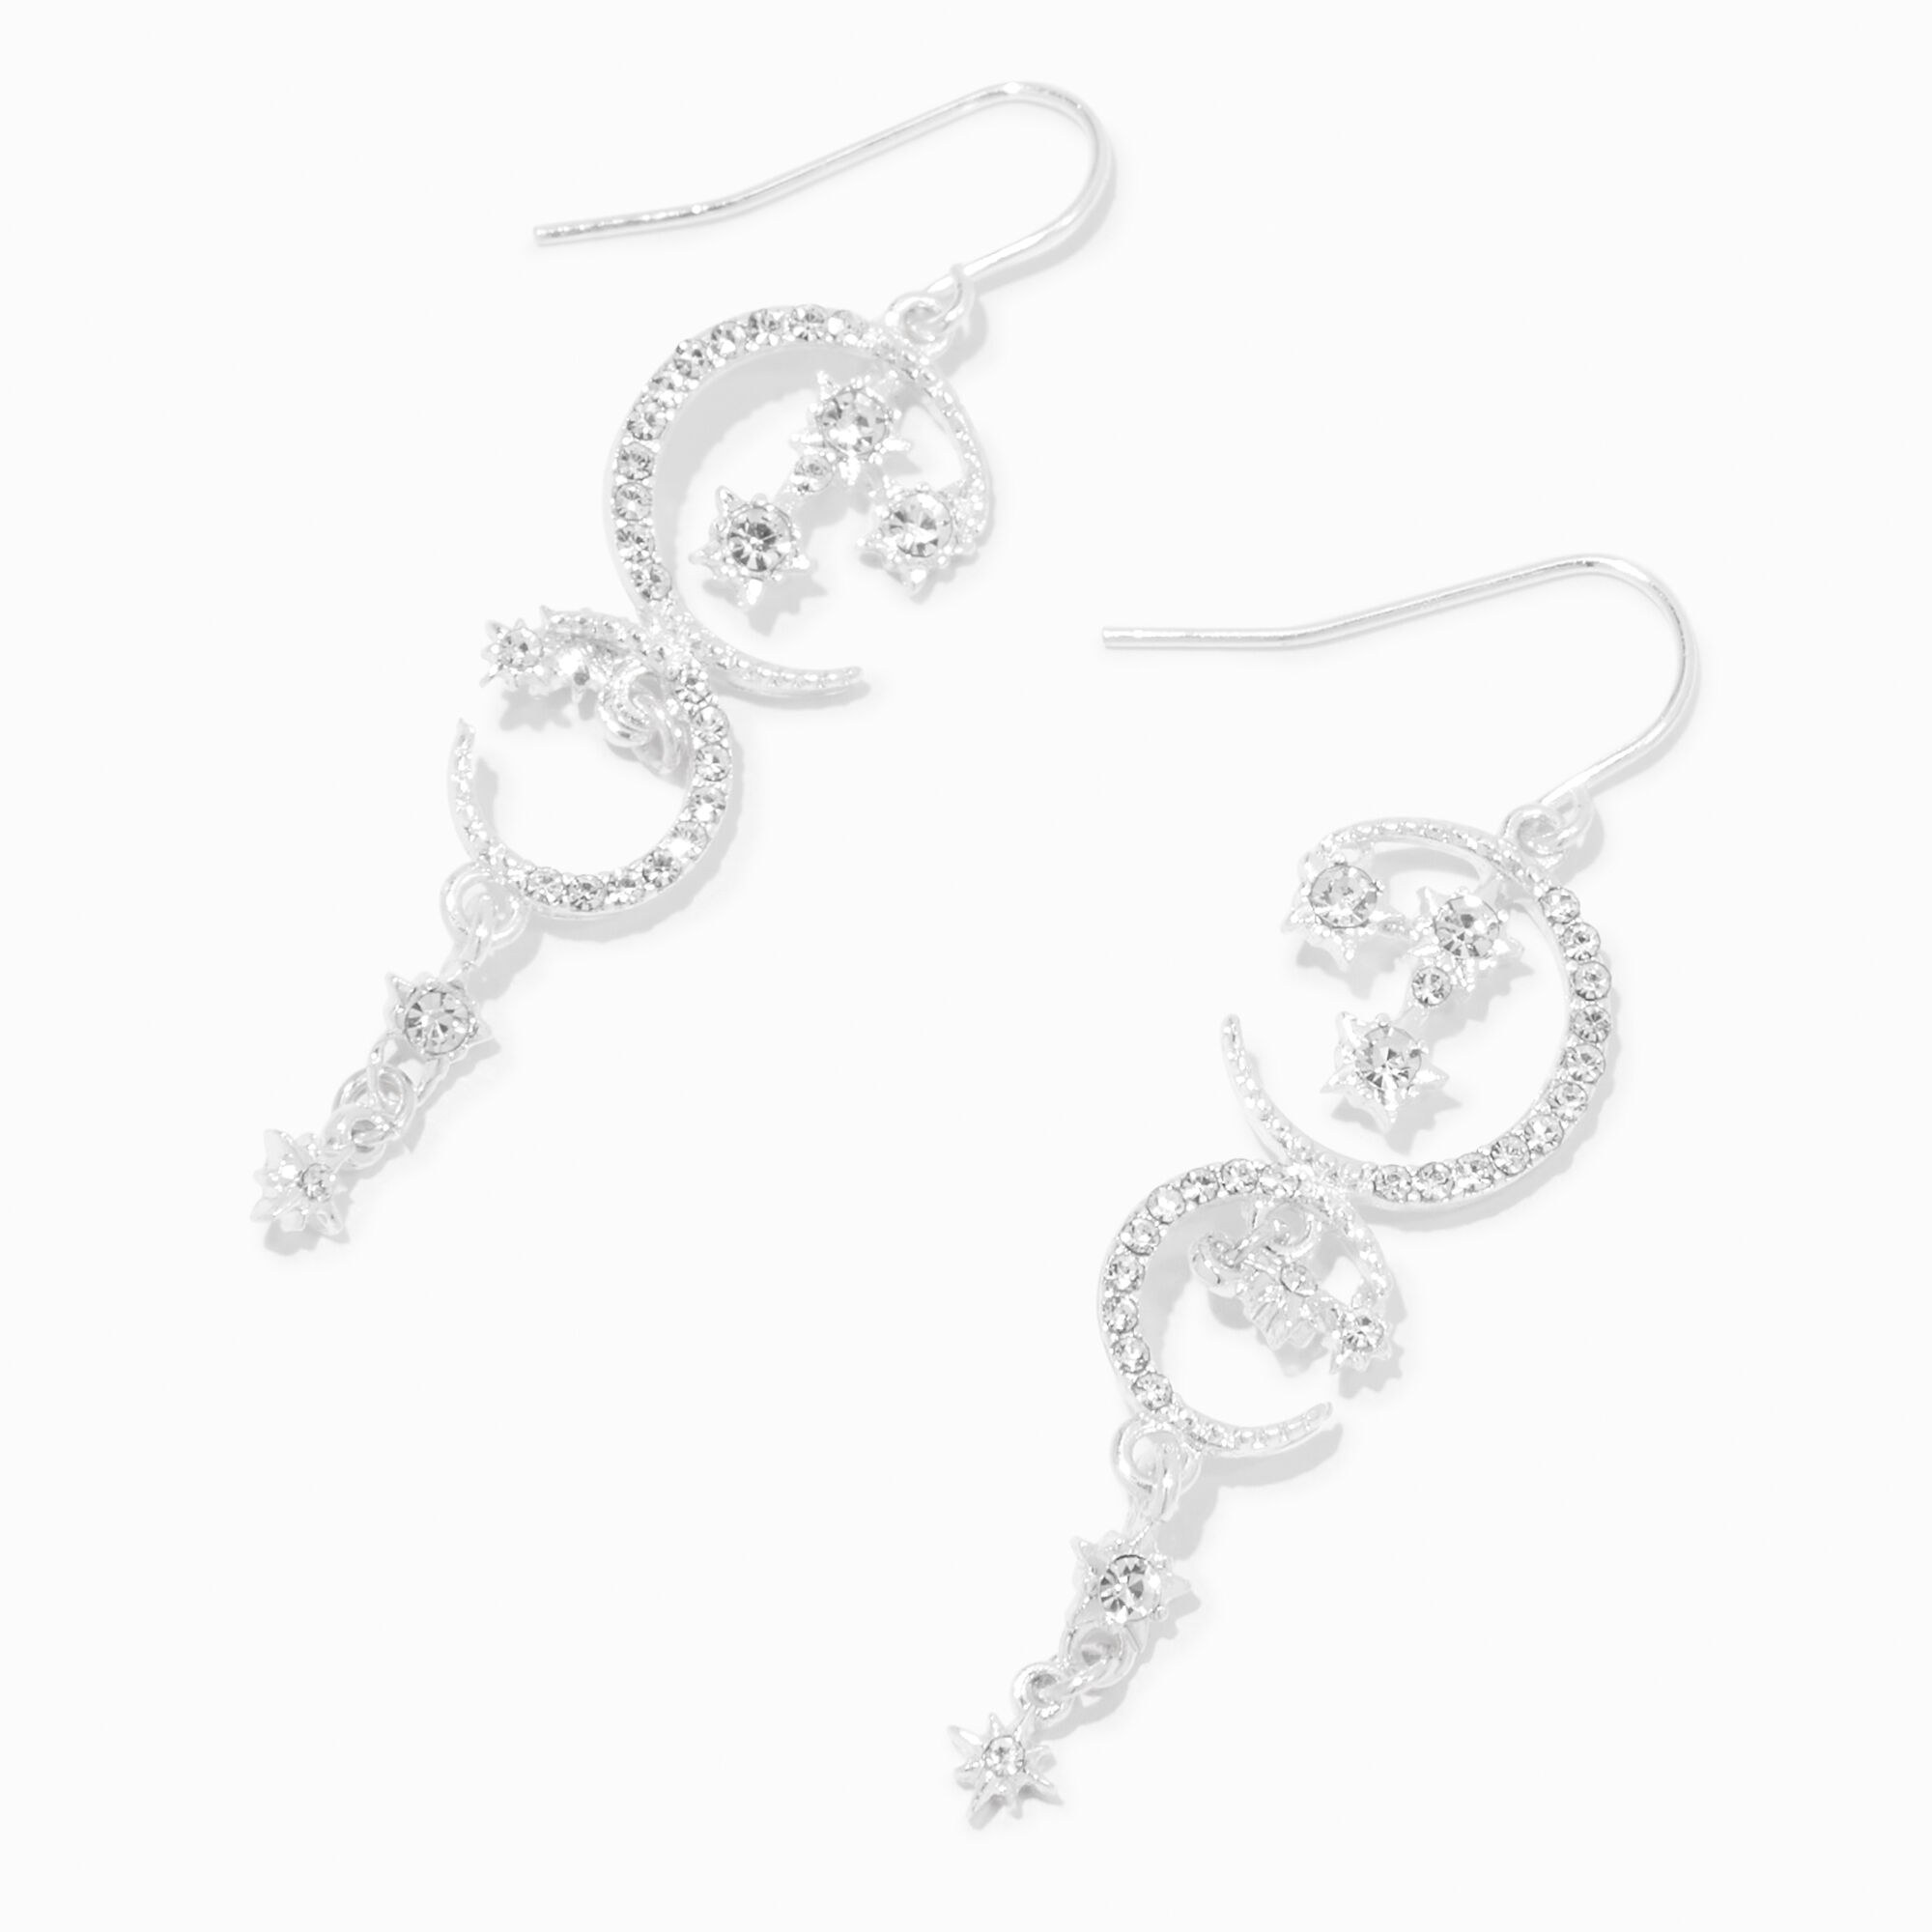 View Claires Tone Celestial Sparkle 2 Drop Earrings Silver information